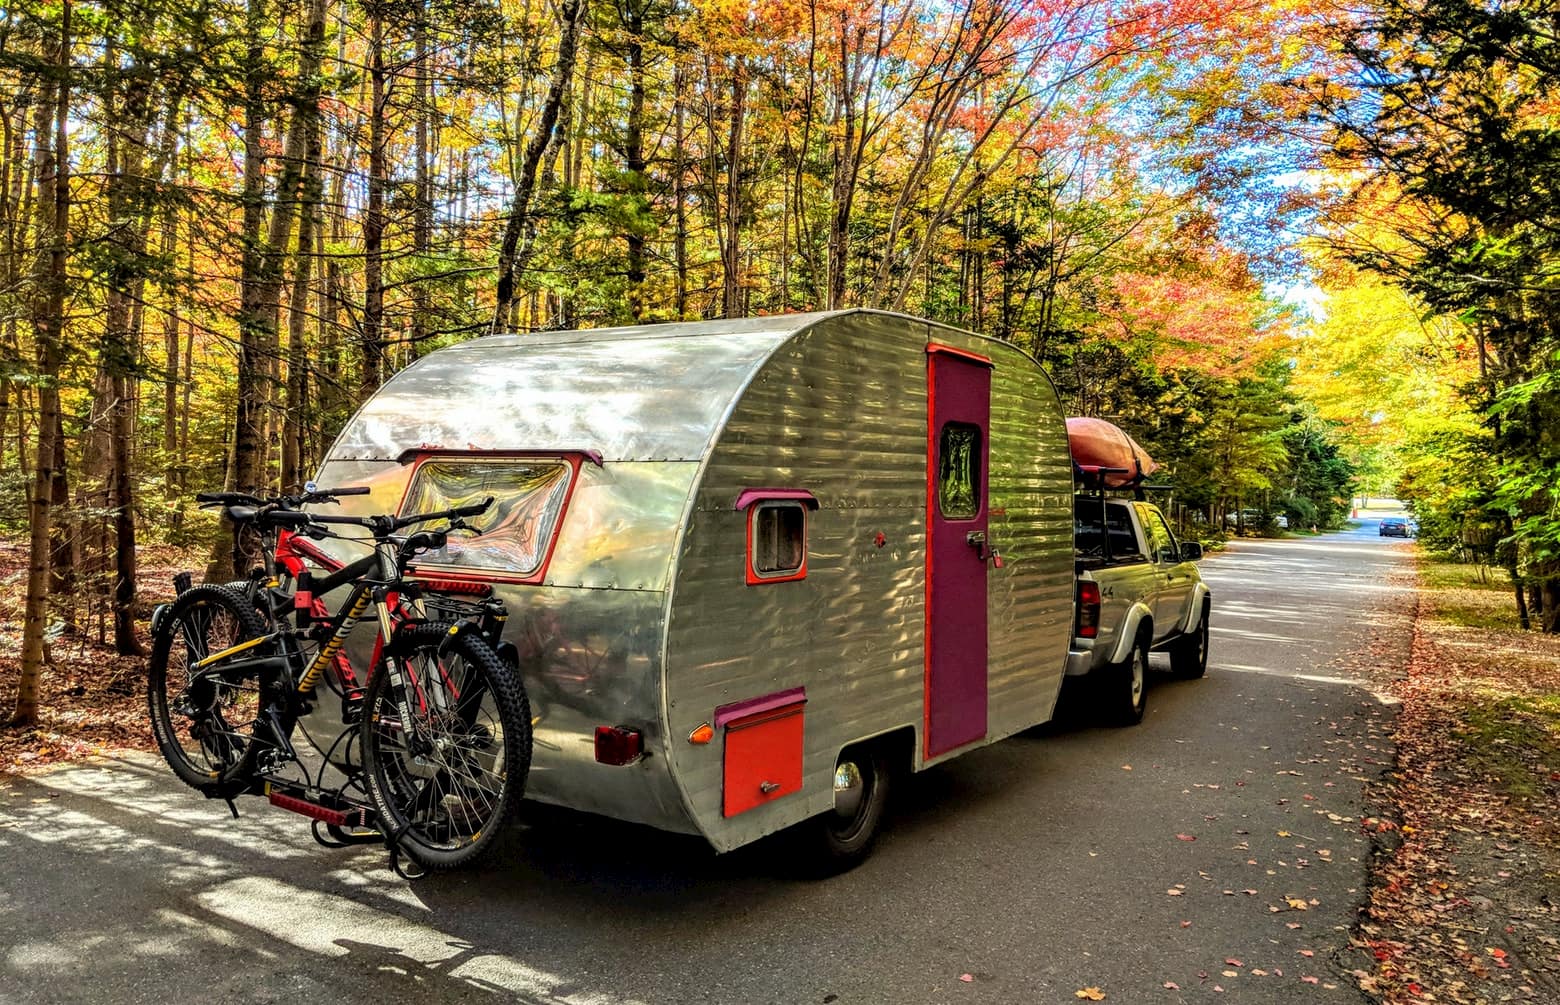 Pickup truck hitched to chrome Trailer with bike rack in Maine autumn foliage.